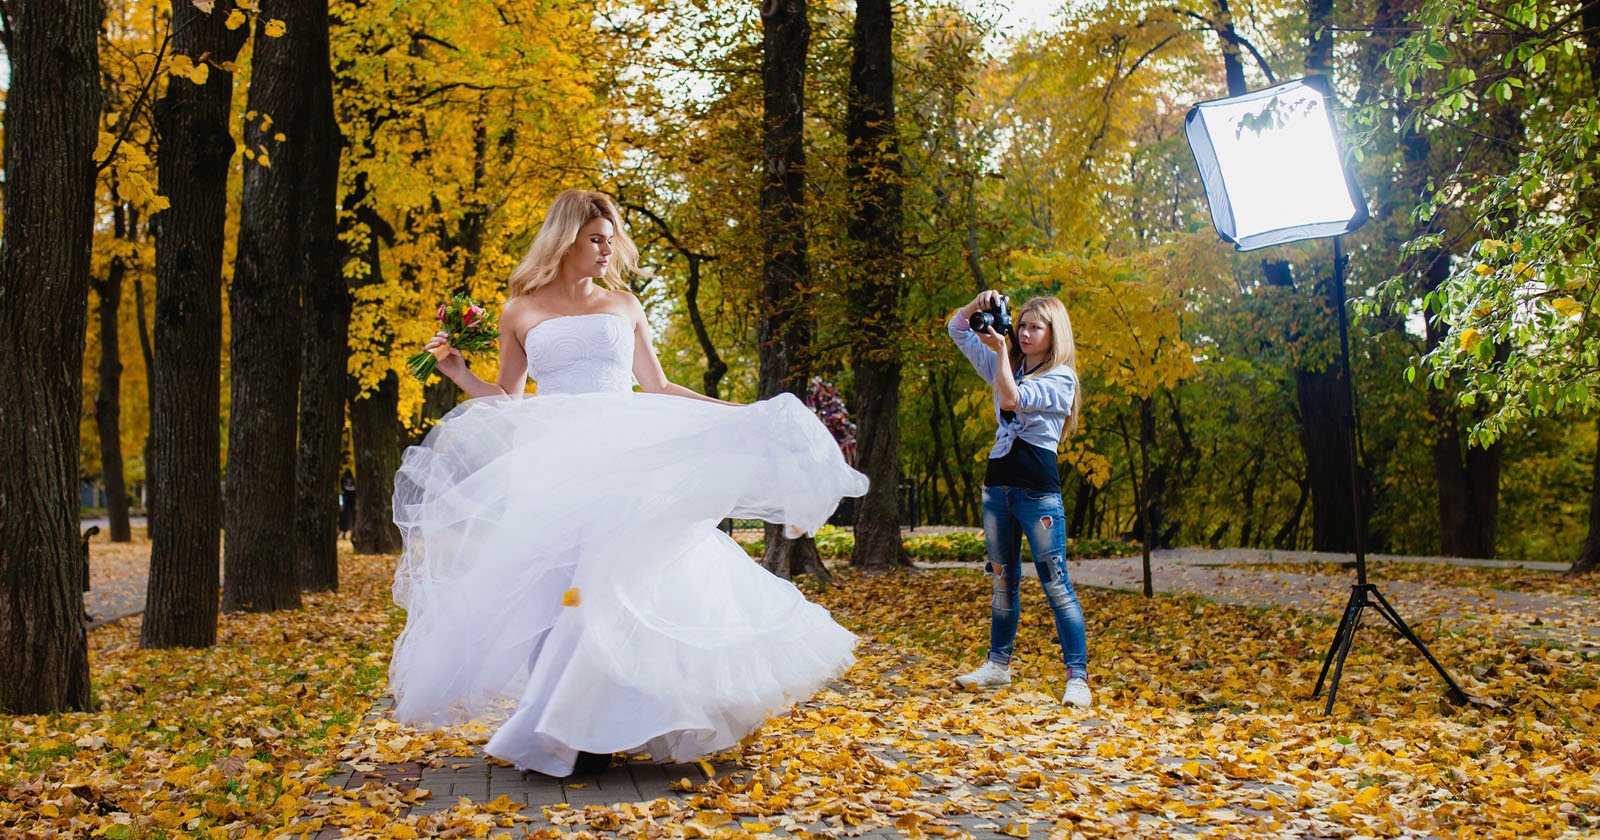 Photographer Cursed Out for Refusing to Send Wedding Photos Until Shes Paid